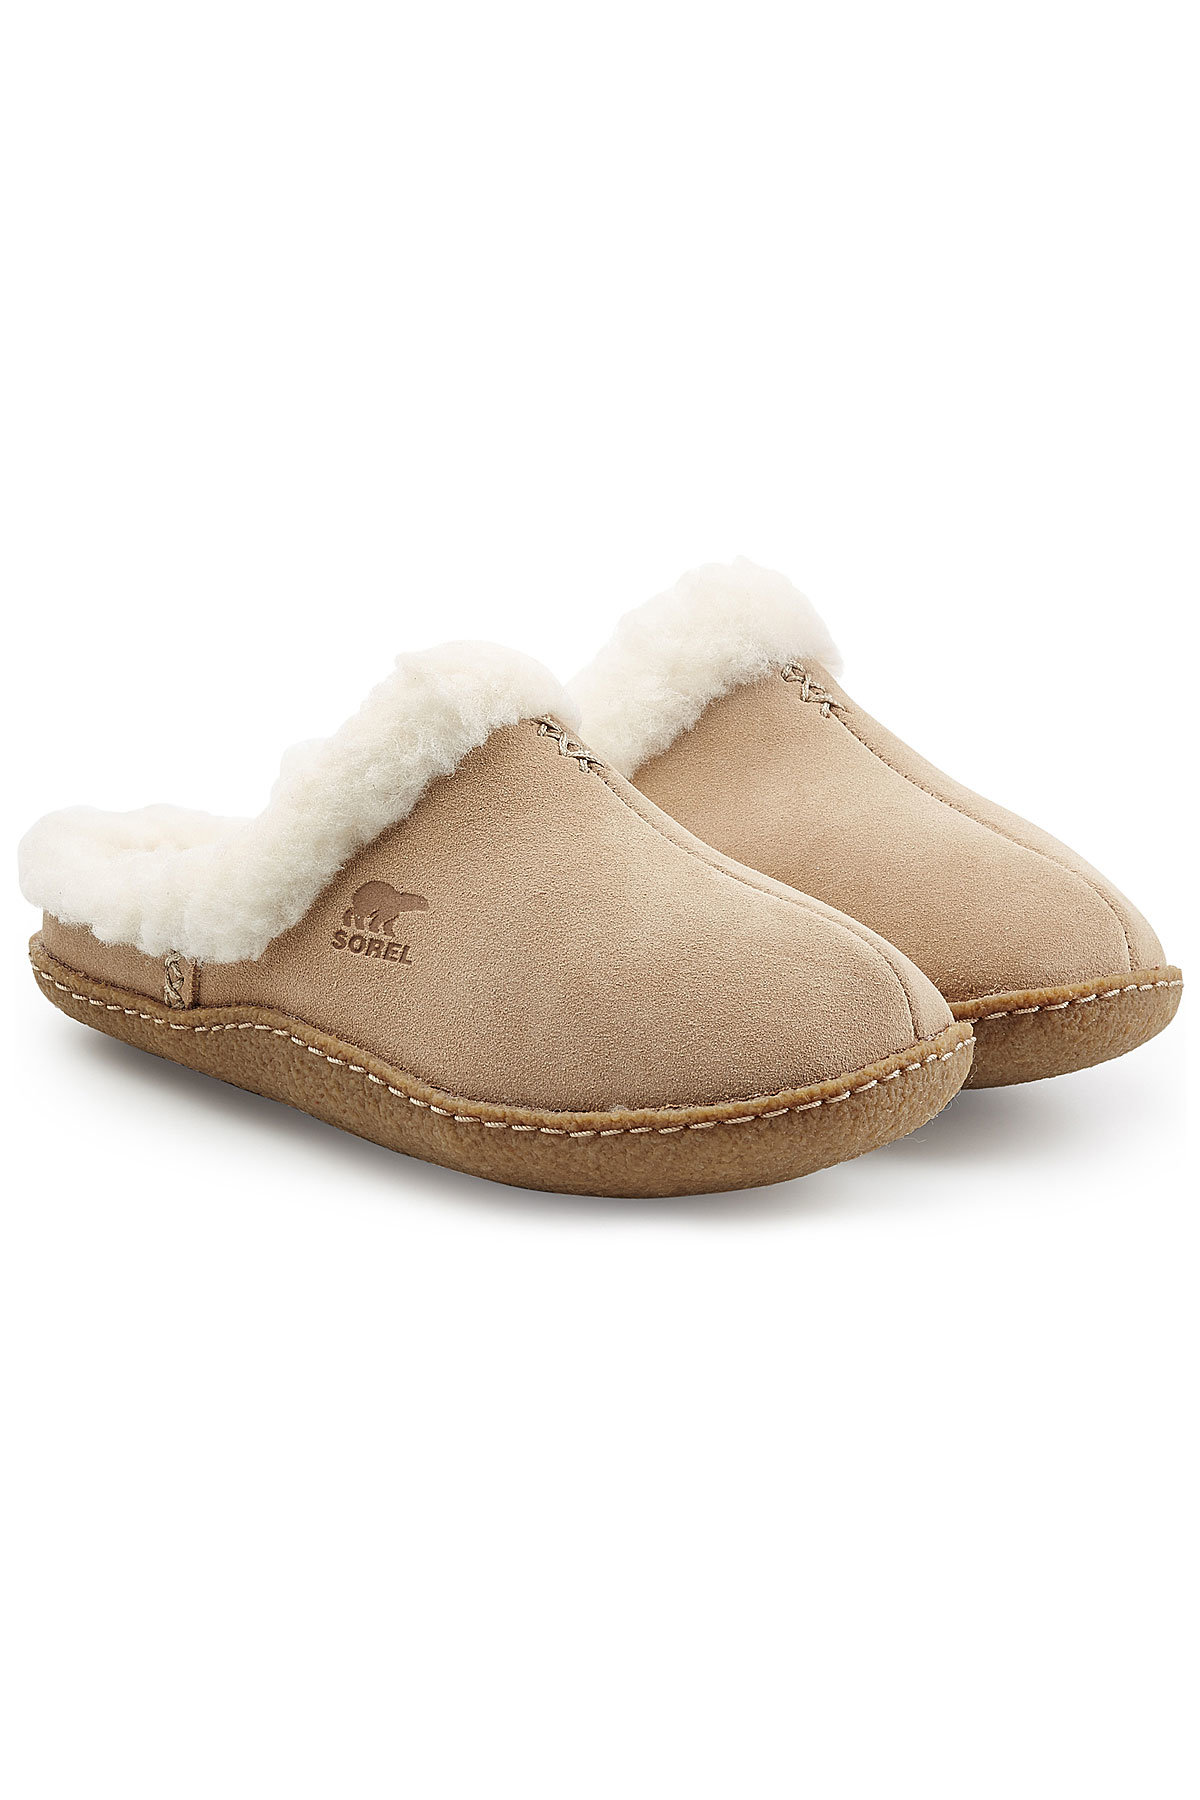 Sorel - Shearling Lined Suede Slippers